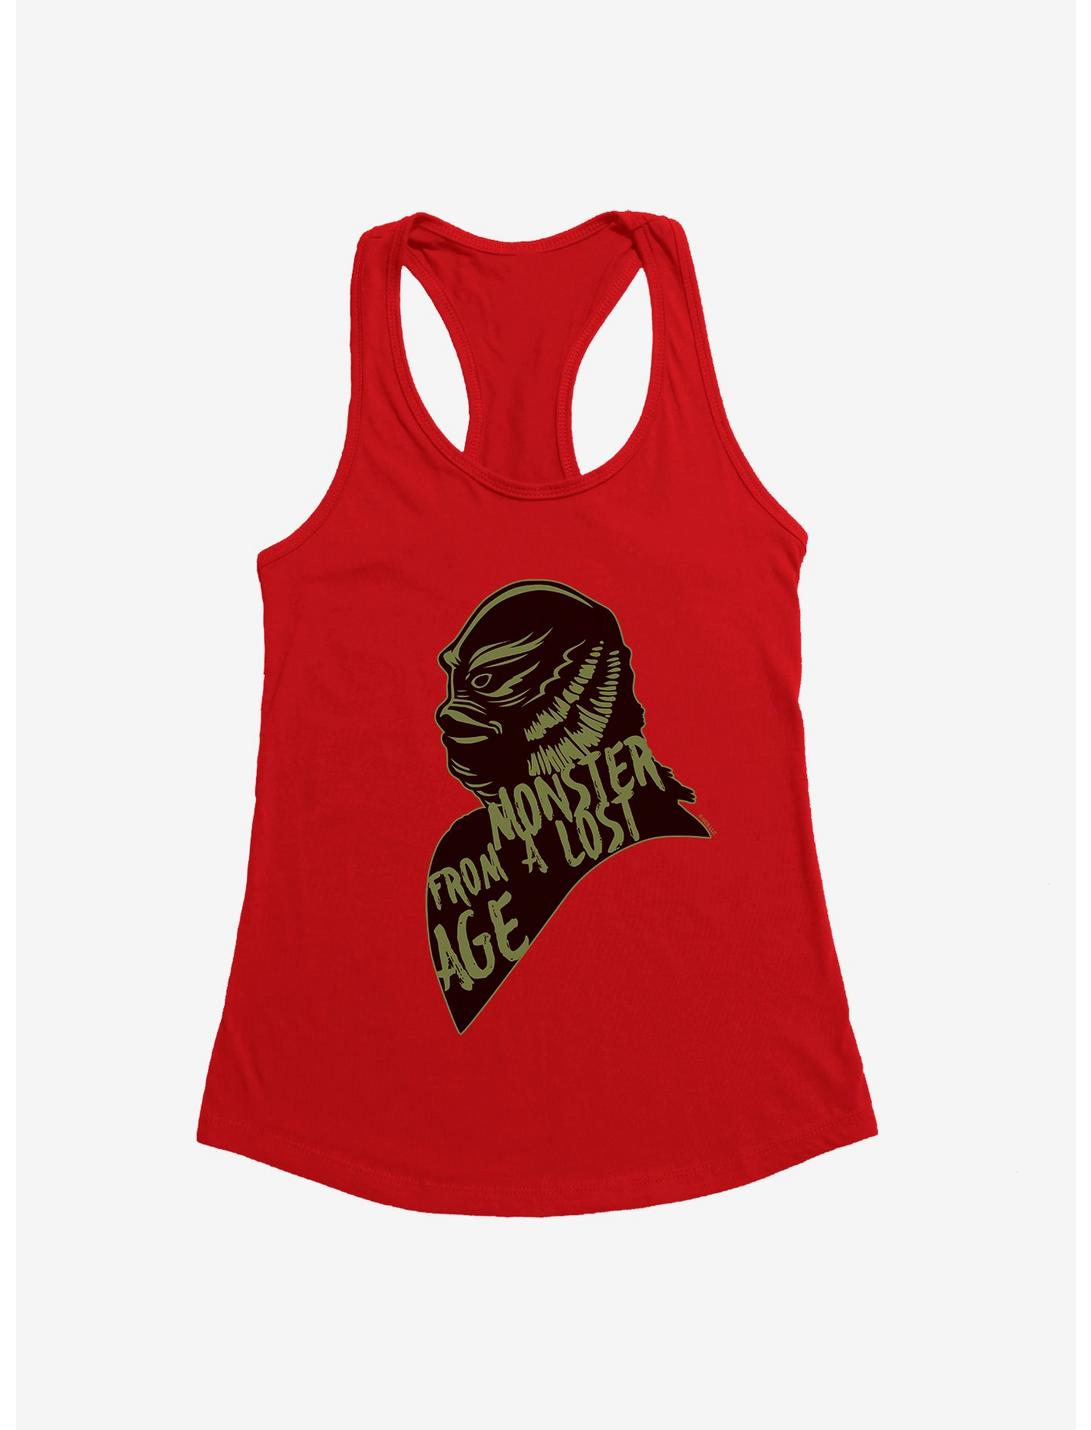 Universal Monsters Creature From The Black Lagoon Monster From a Lost Age Girls Tank, , hi-res